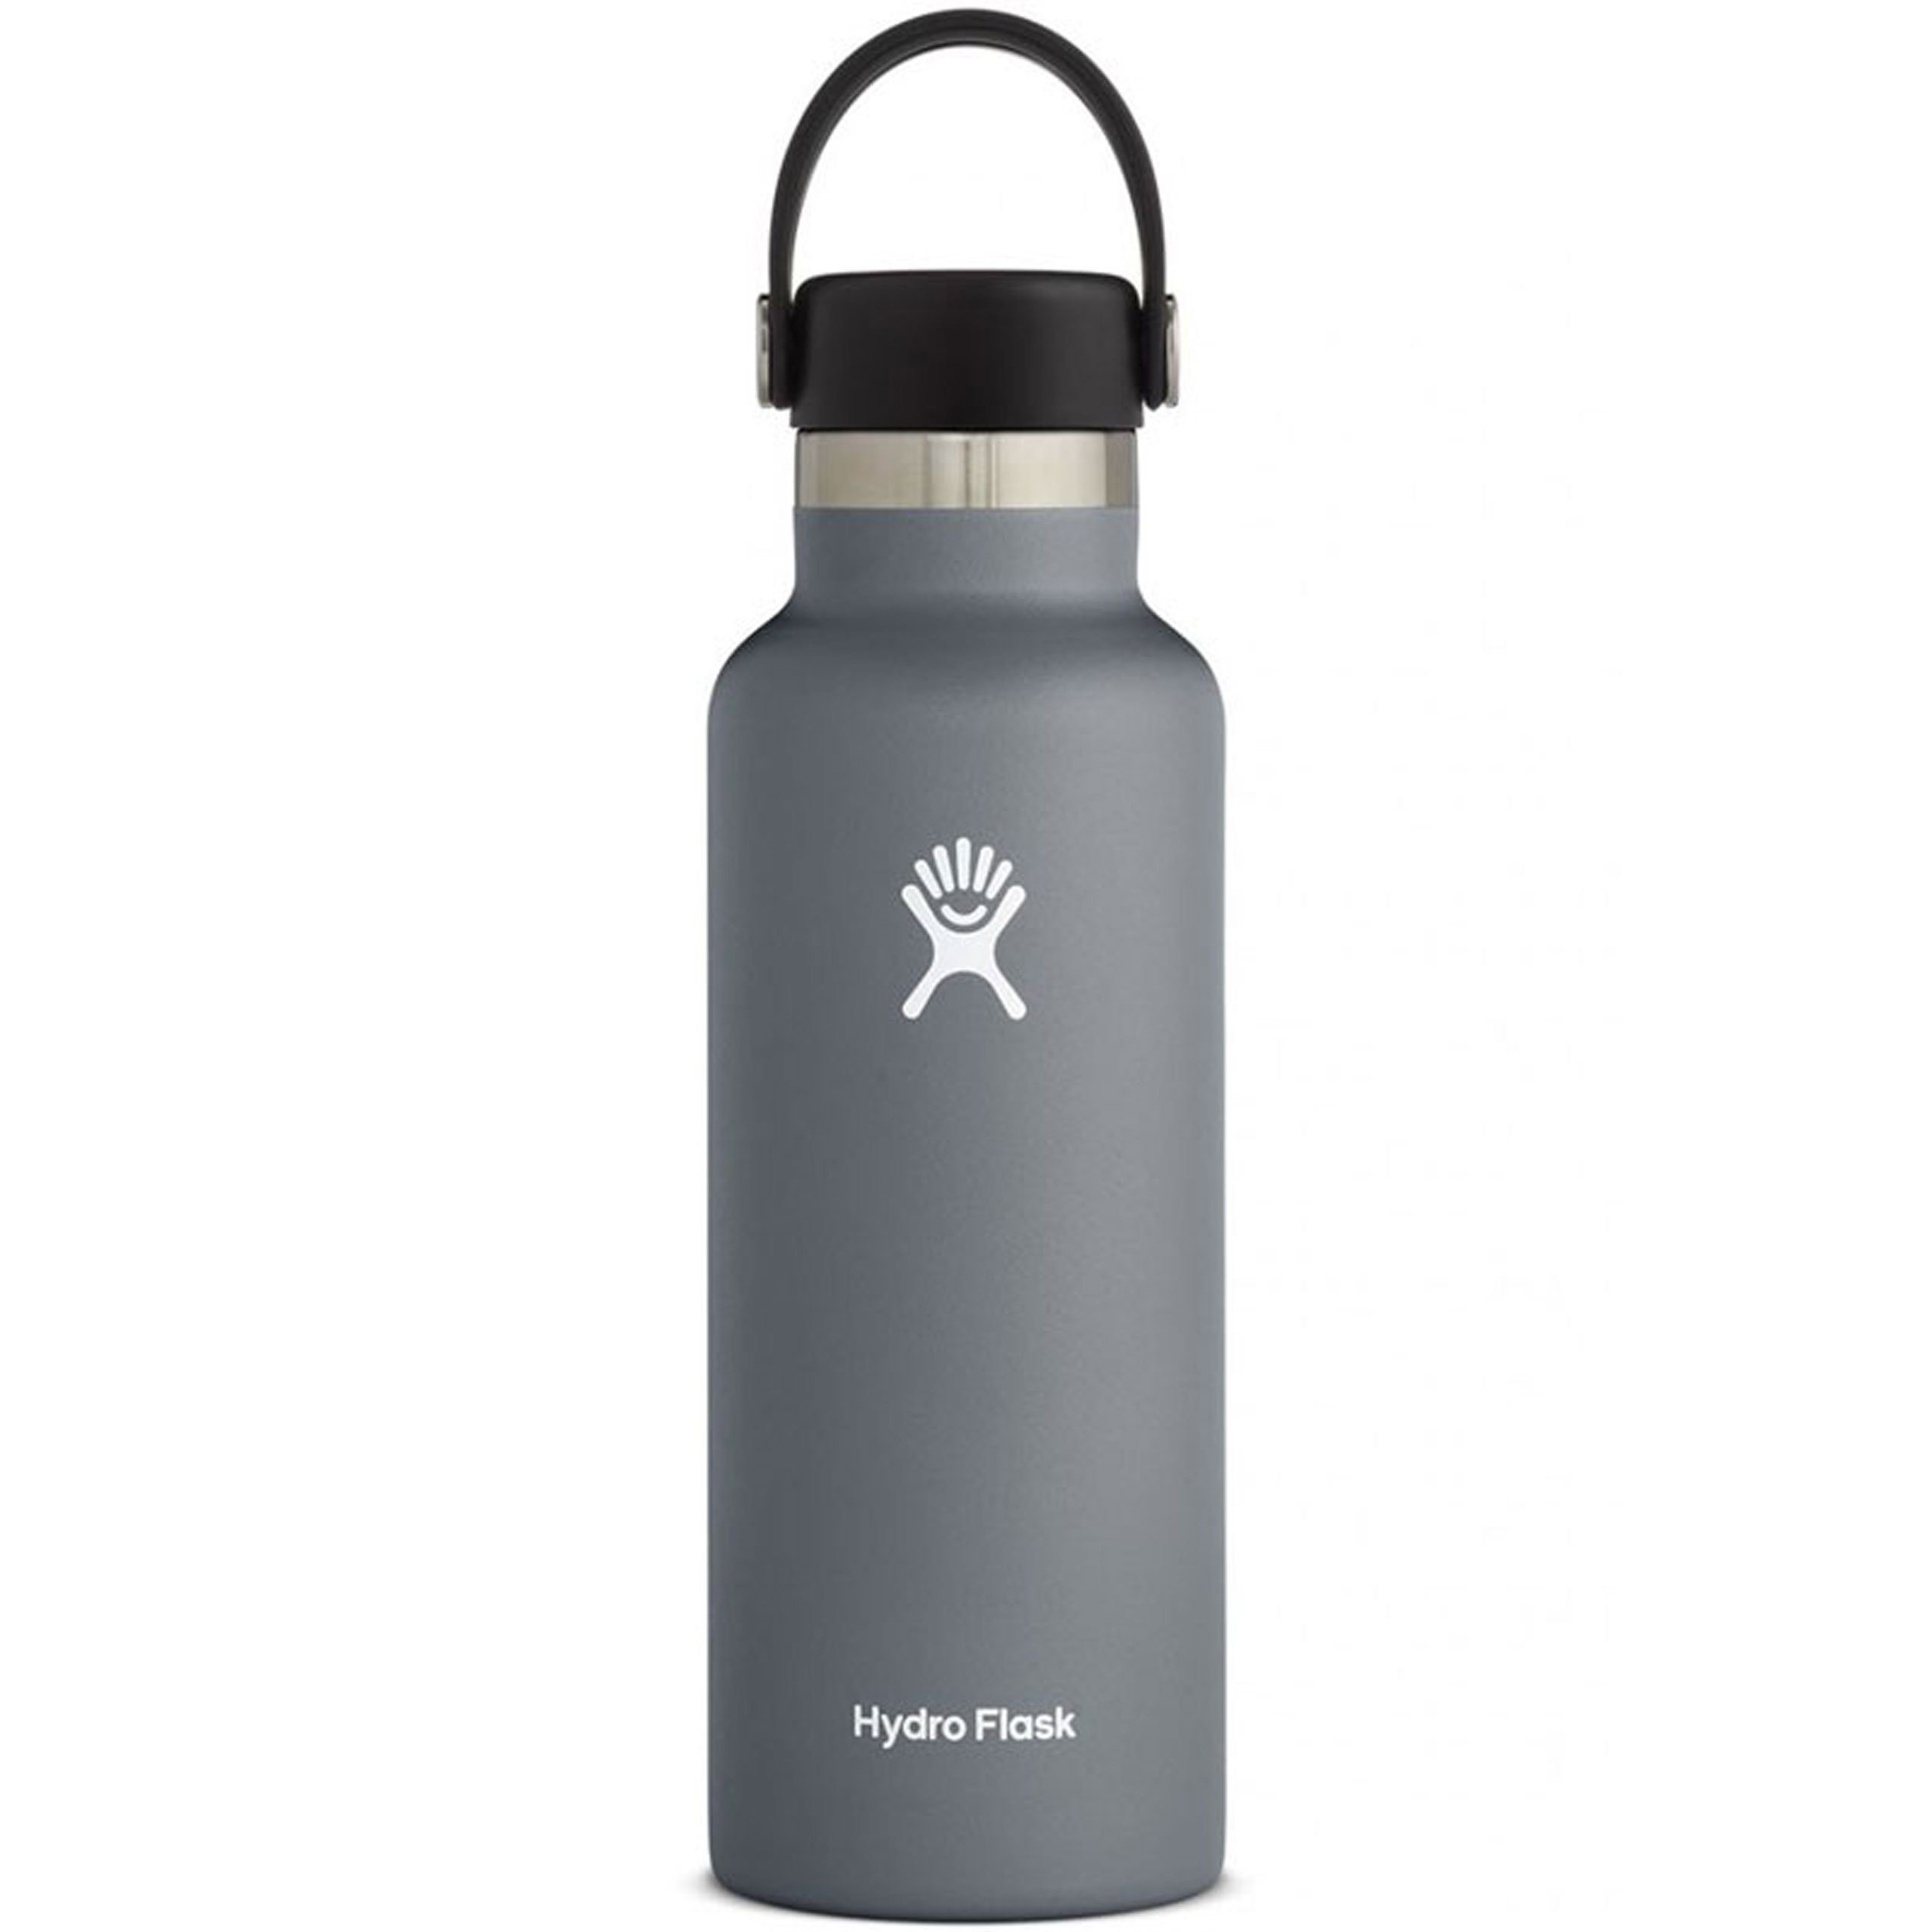 Hydro Flask Isolierflasche Hydro Flask Bottle Standard Mouth - Isolierflasche/Thermoflasche stone